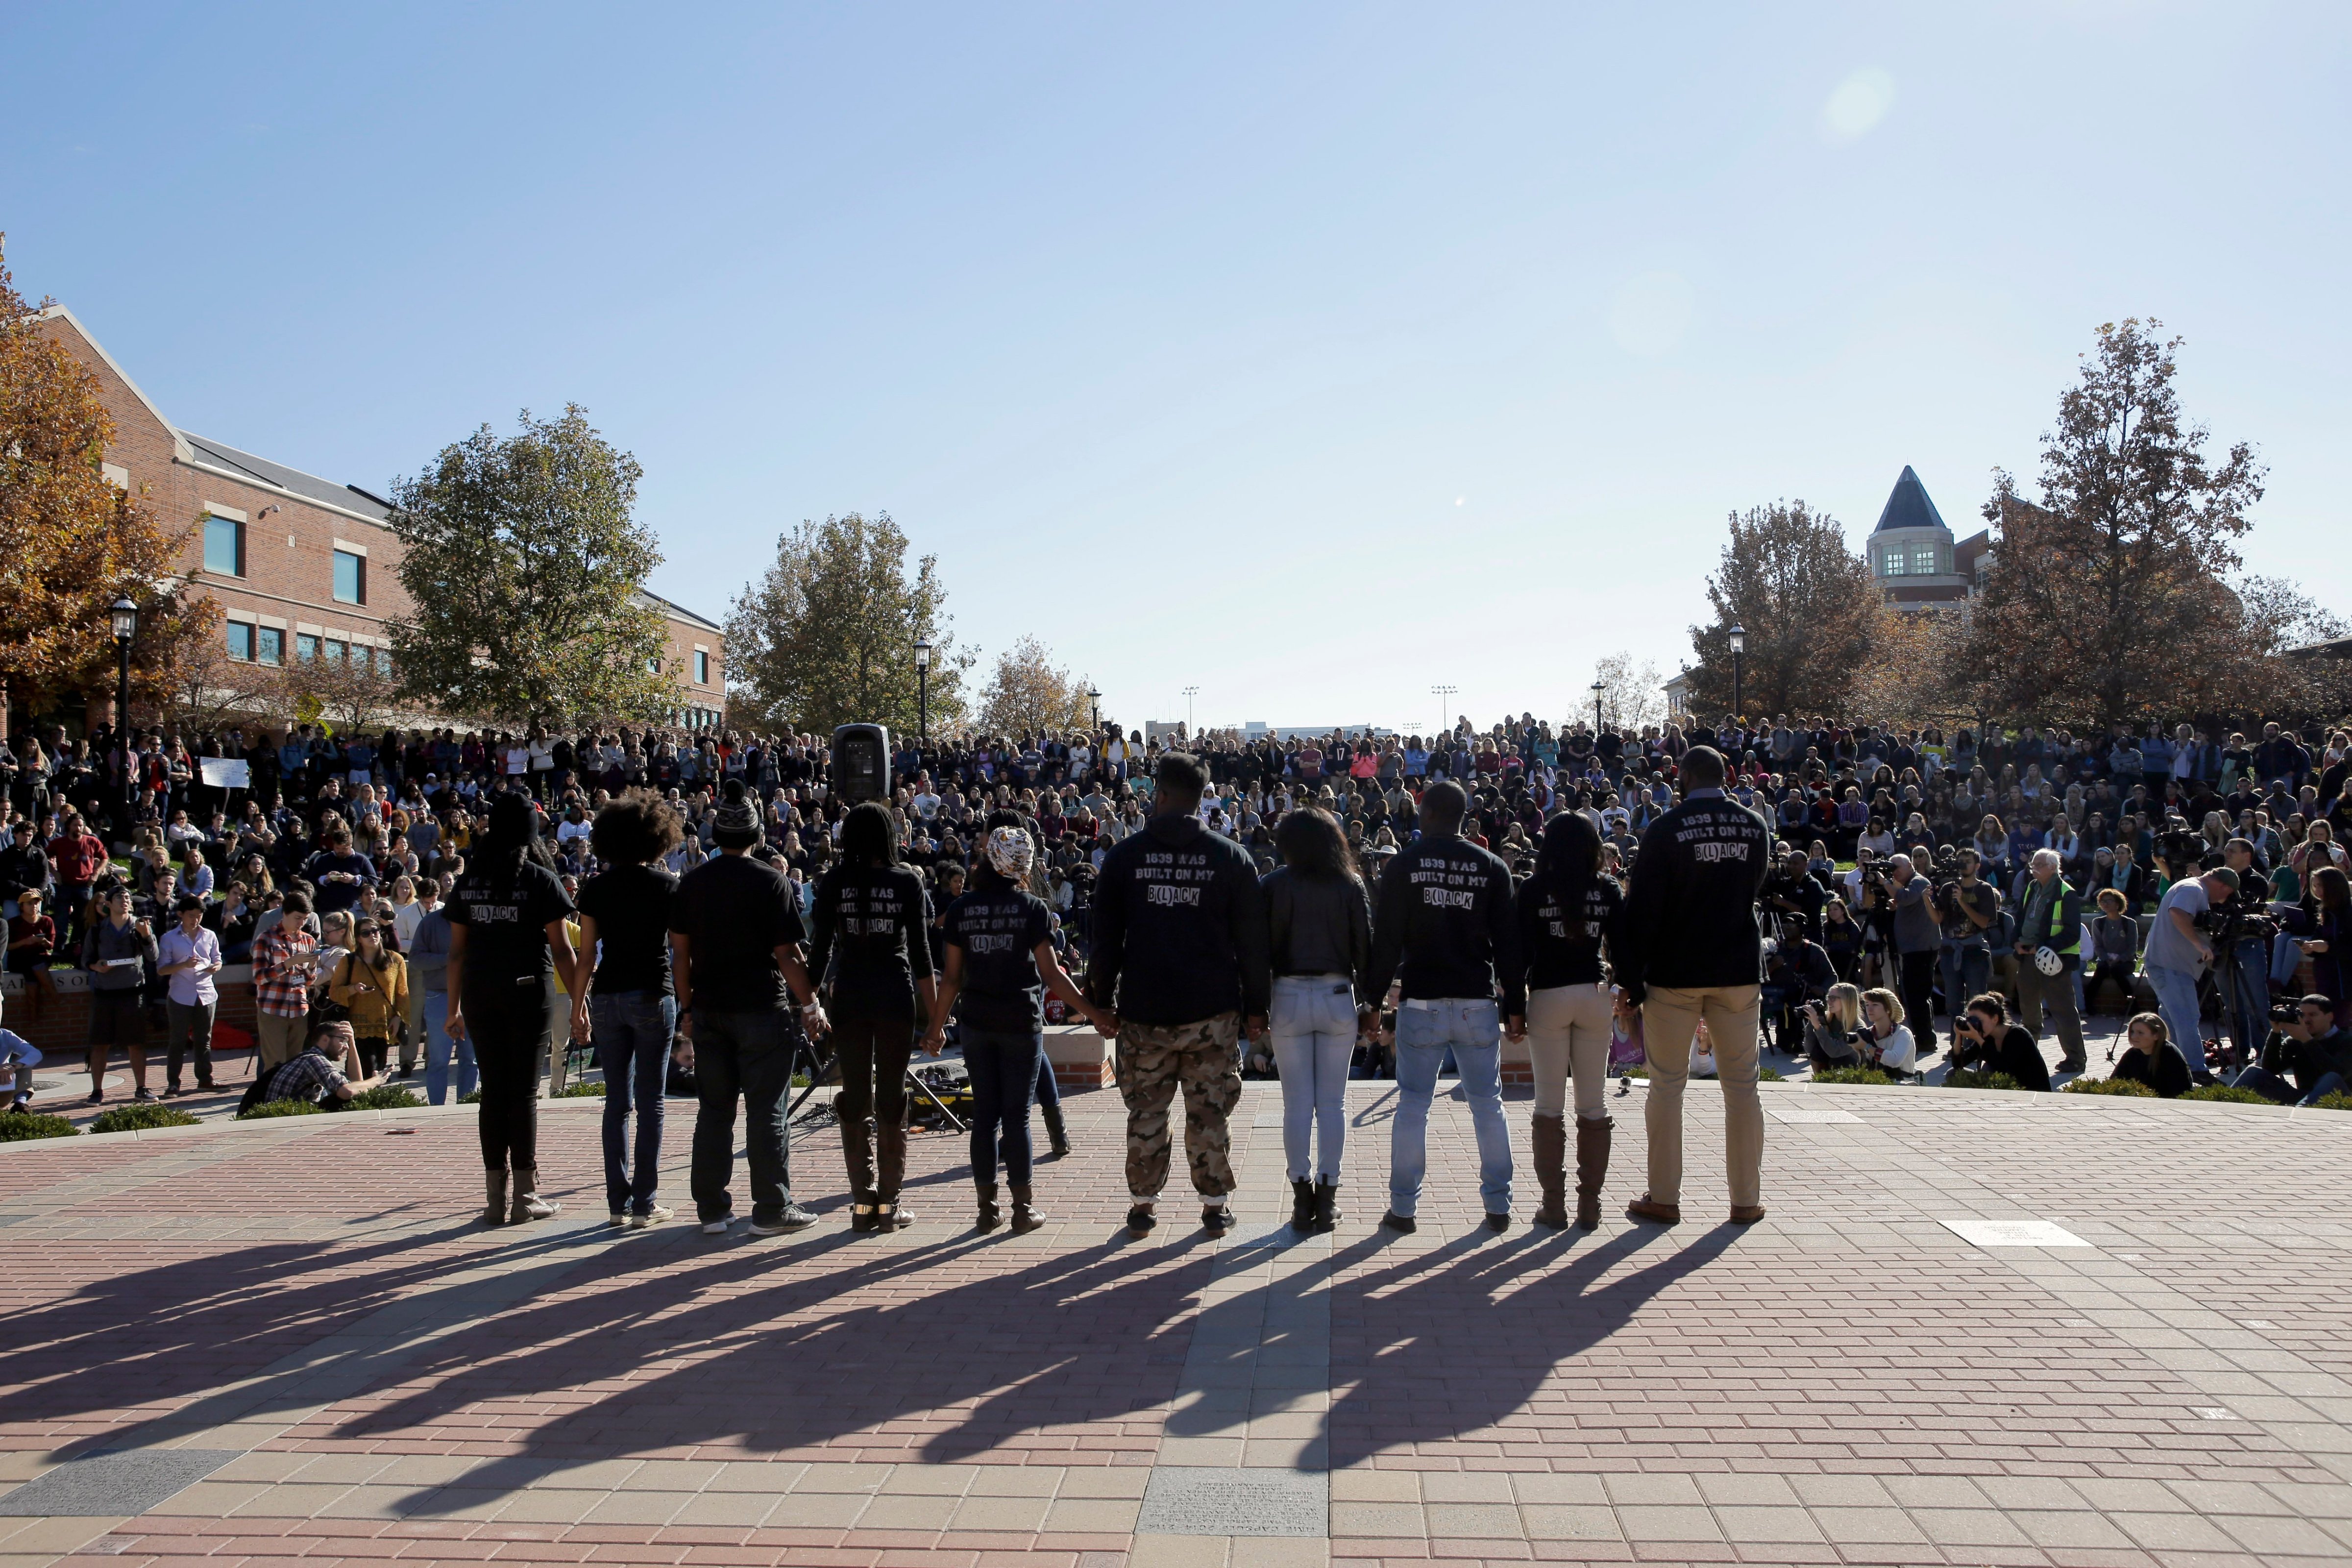 Members of black student protest group following the announcement University of Missouri System President Tim Wolfe would resign, on Nov. 9, 2015. (Jeff Roberson—AP)